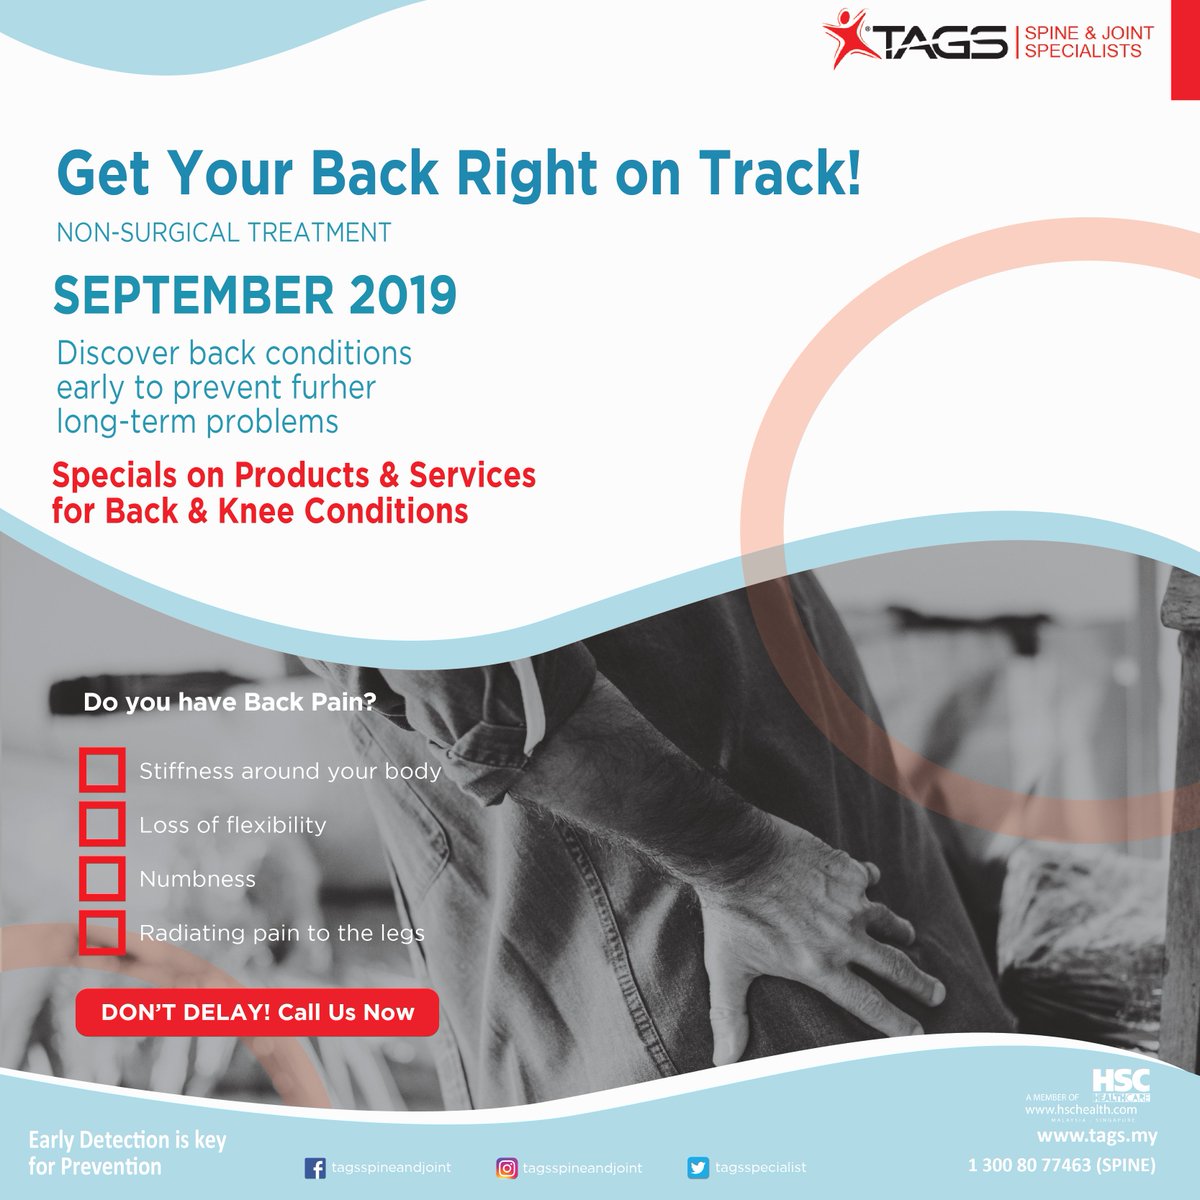 Lets get your back right on track!

Early detection is the key to prevention. Make an appointment with us today!

For more information visit tags.my

#backpainawareness #backpain #nonsurgical #tags #tagsspineandjoint #chiropractic #rehabilitation #physiotherapy